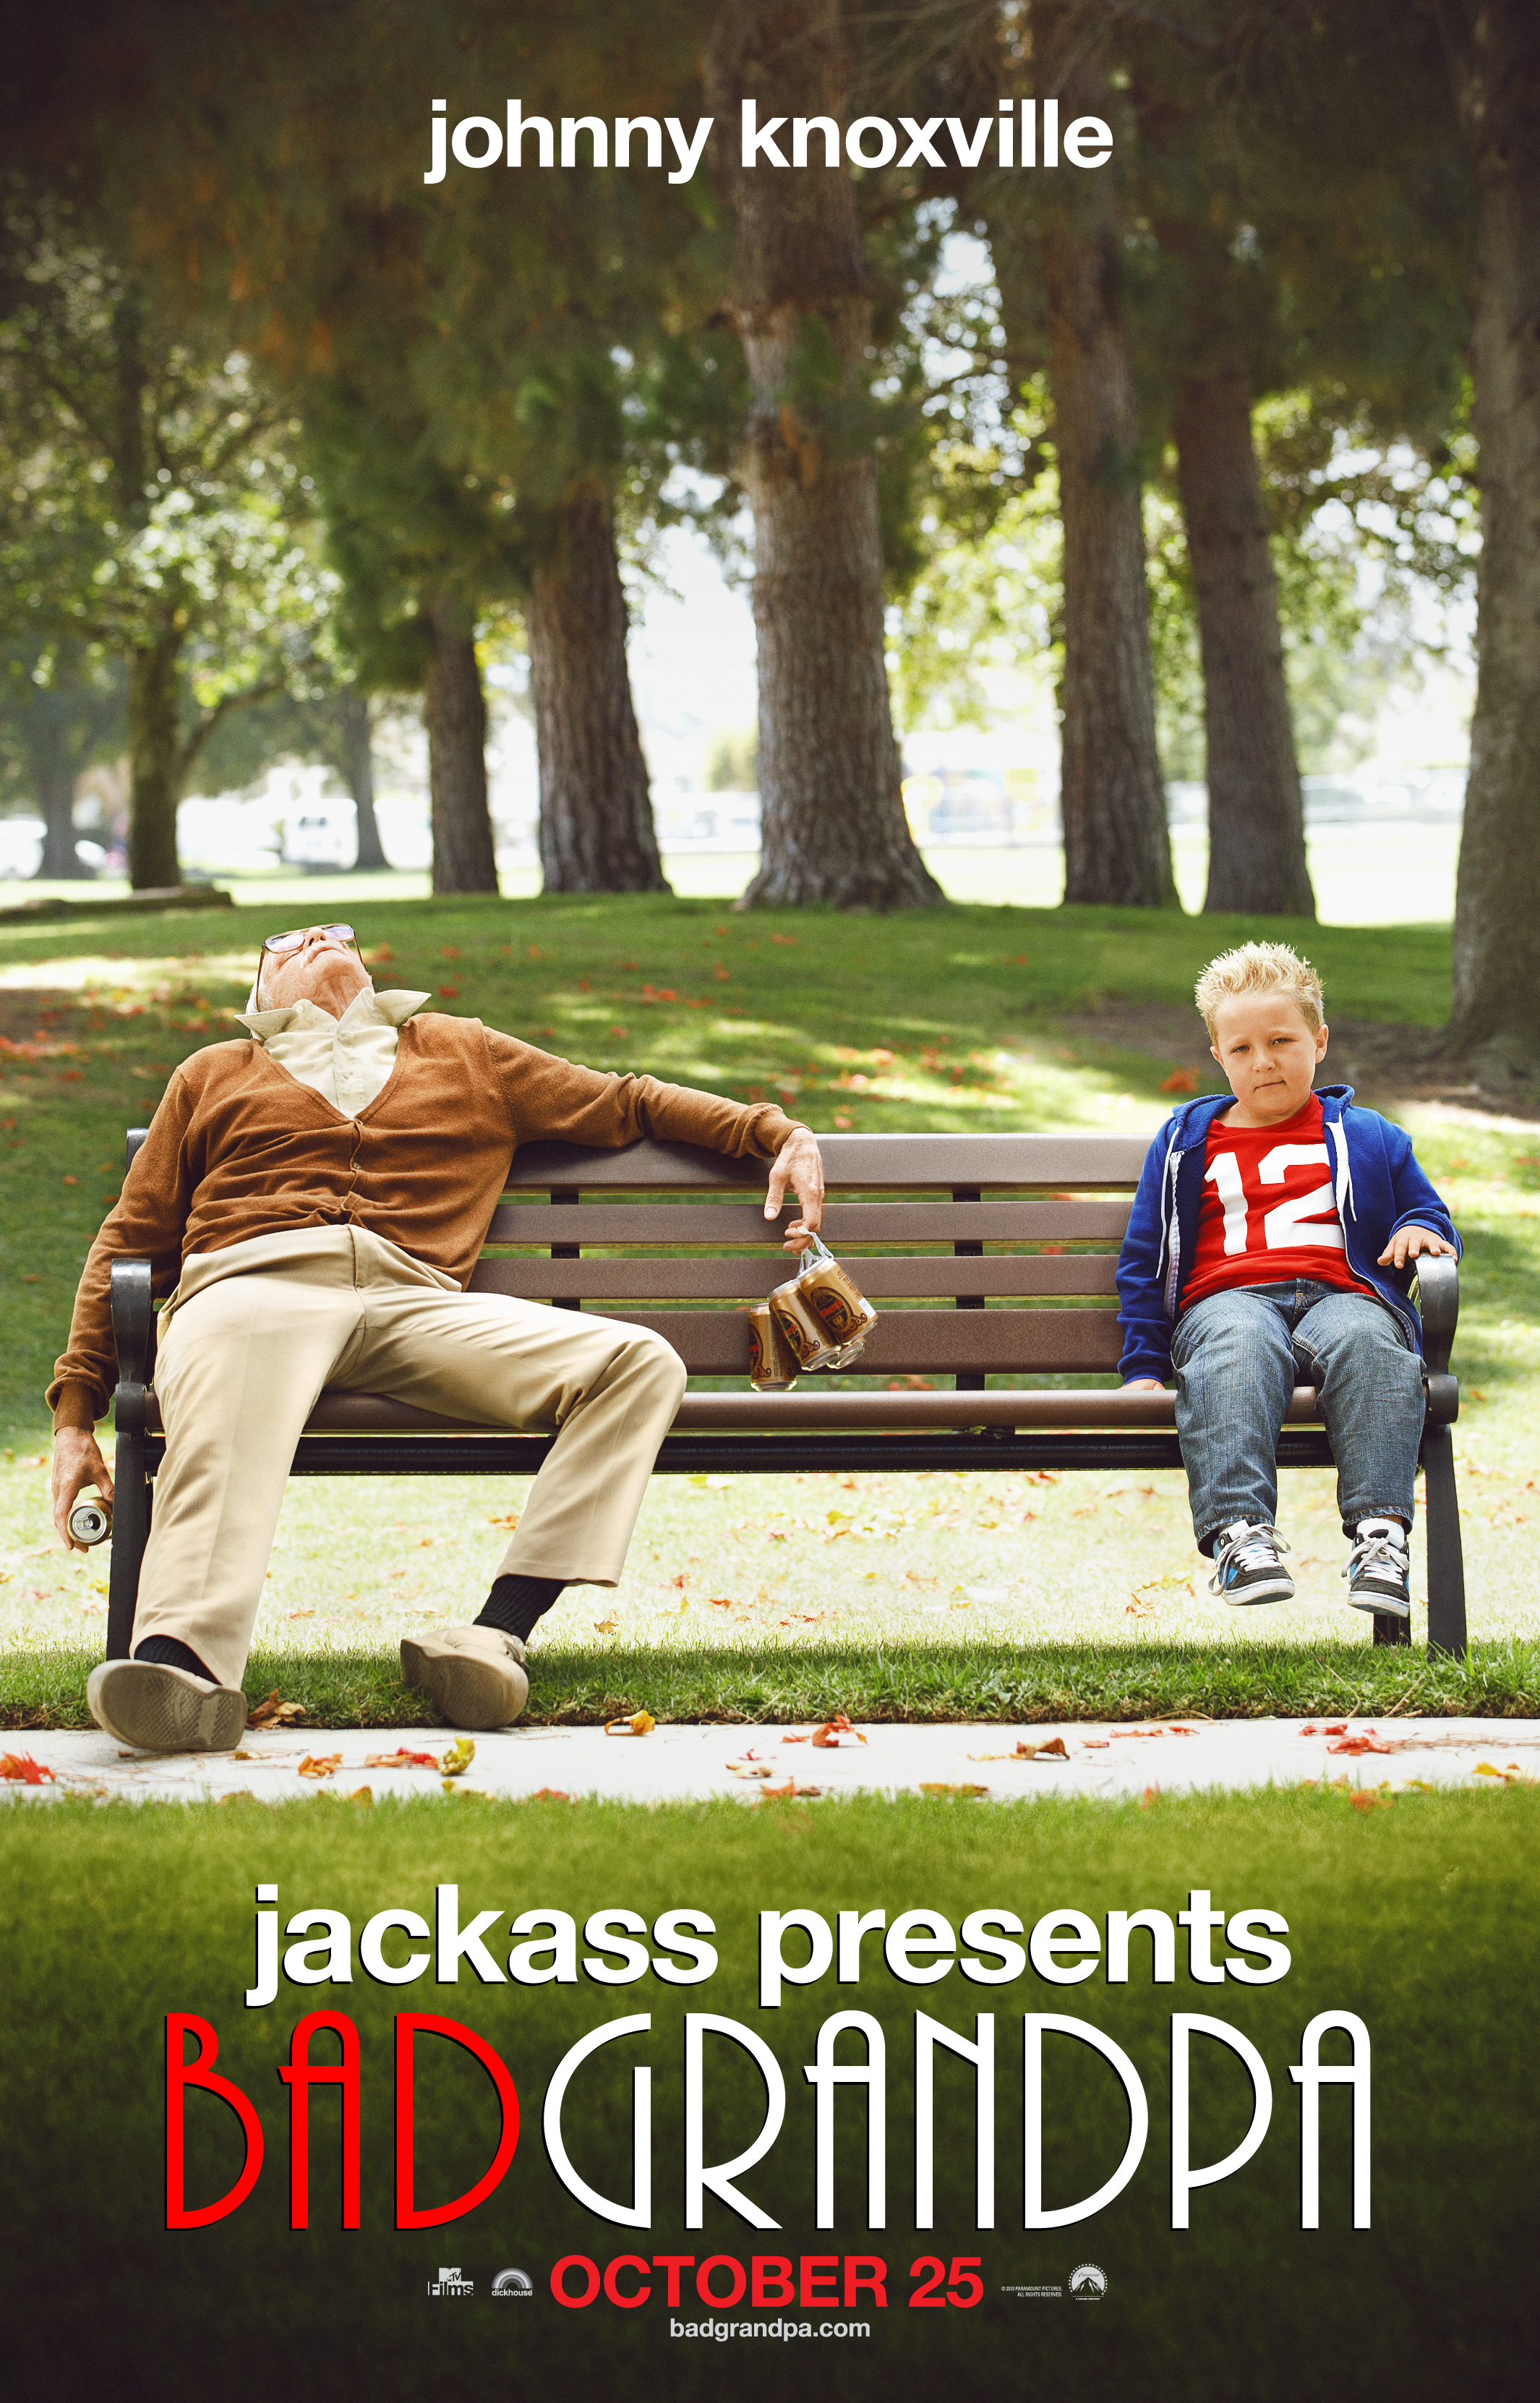 Jackass Presents: Bad Grandpa Gets Messed Up Reactions with New Poster